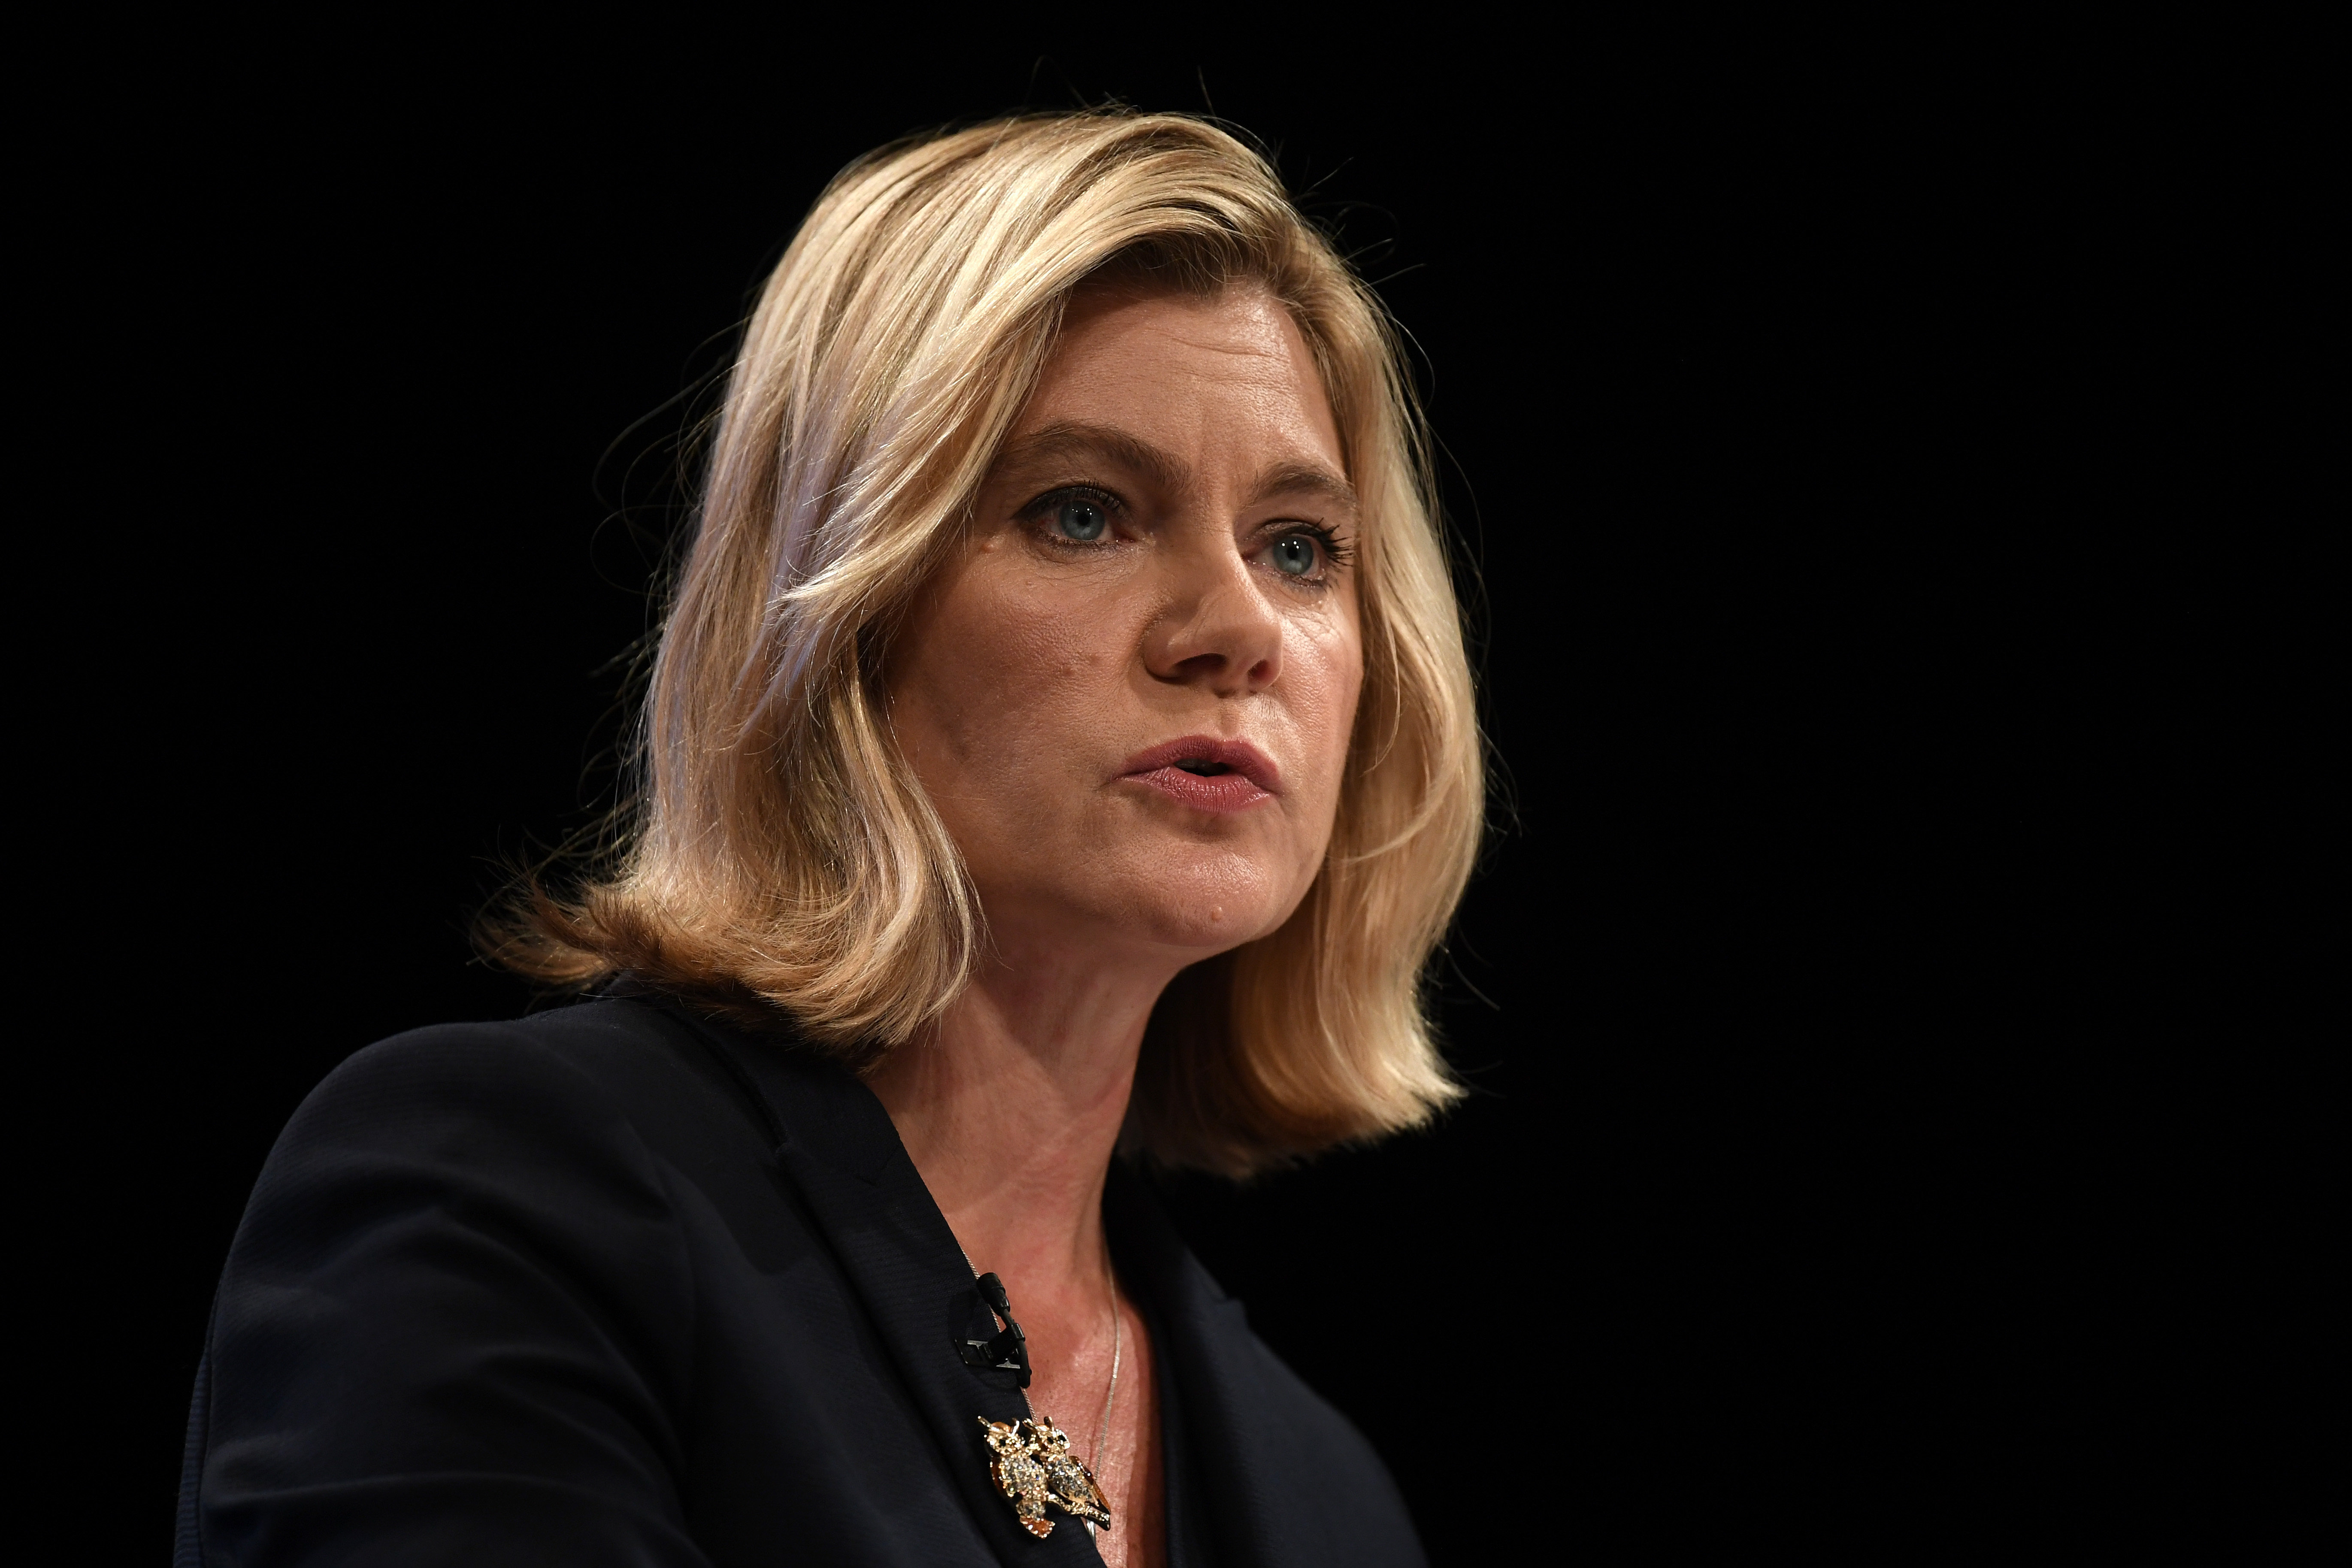 <strong>Justine Greening:&nbsp;&ldquo;These comments show the deep and persistent stain on Labour&rsquo;s ability to represent women, the LGBT community and wider society."</strong>